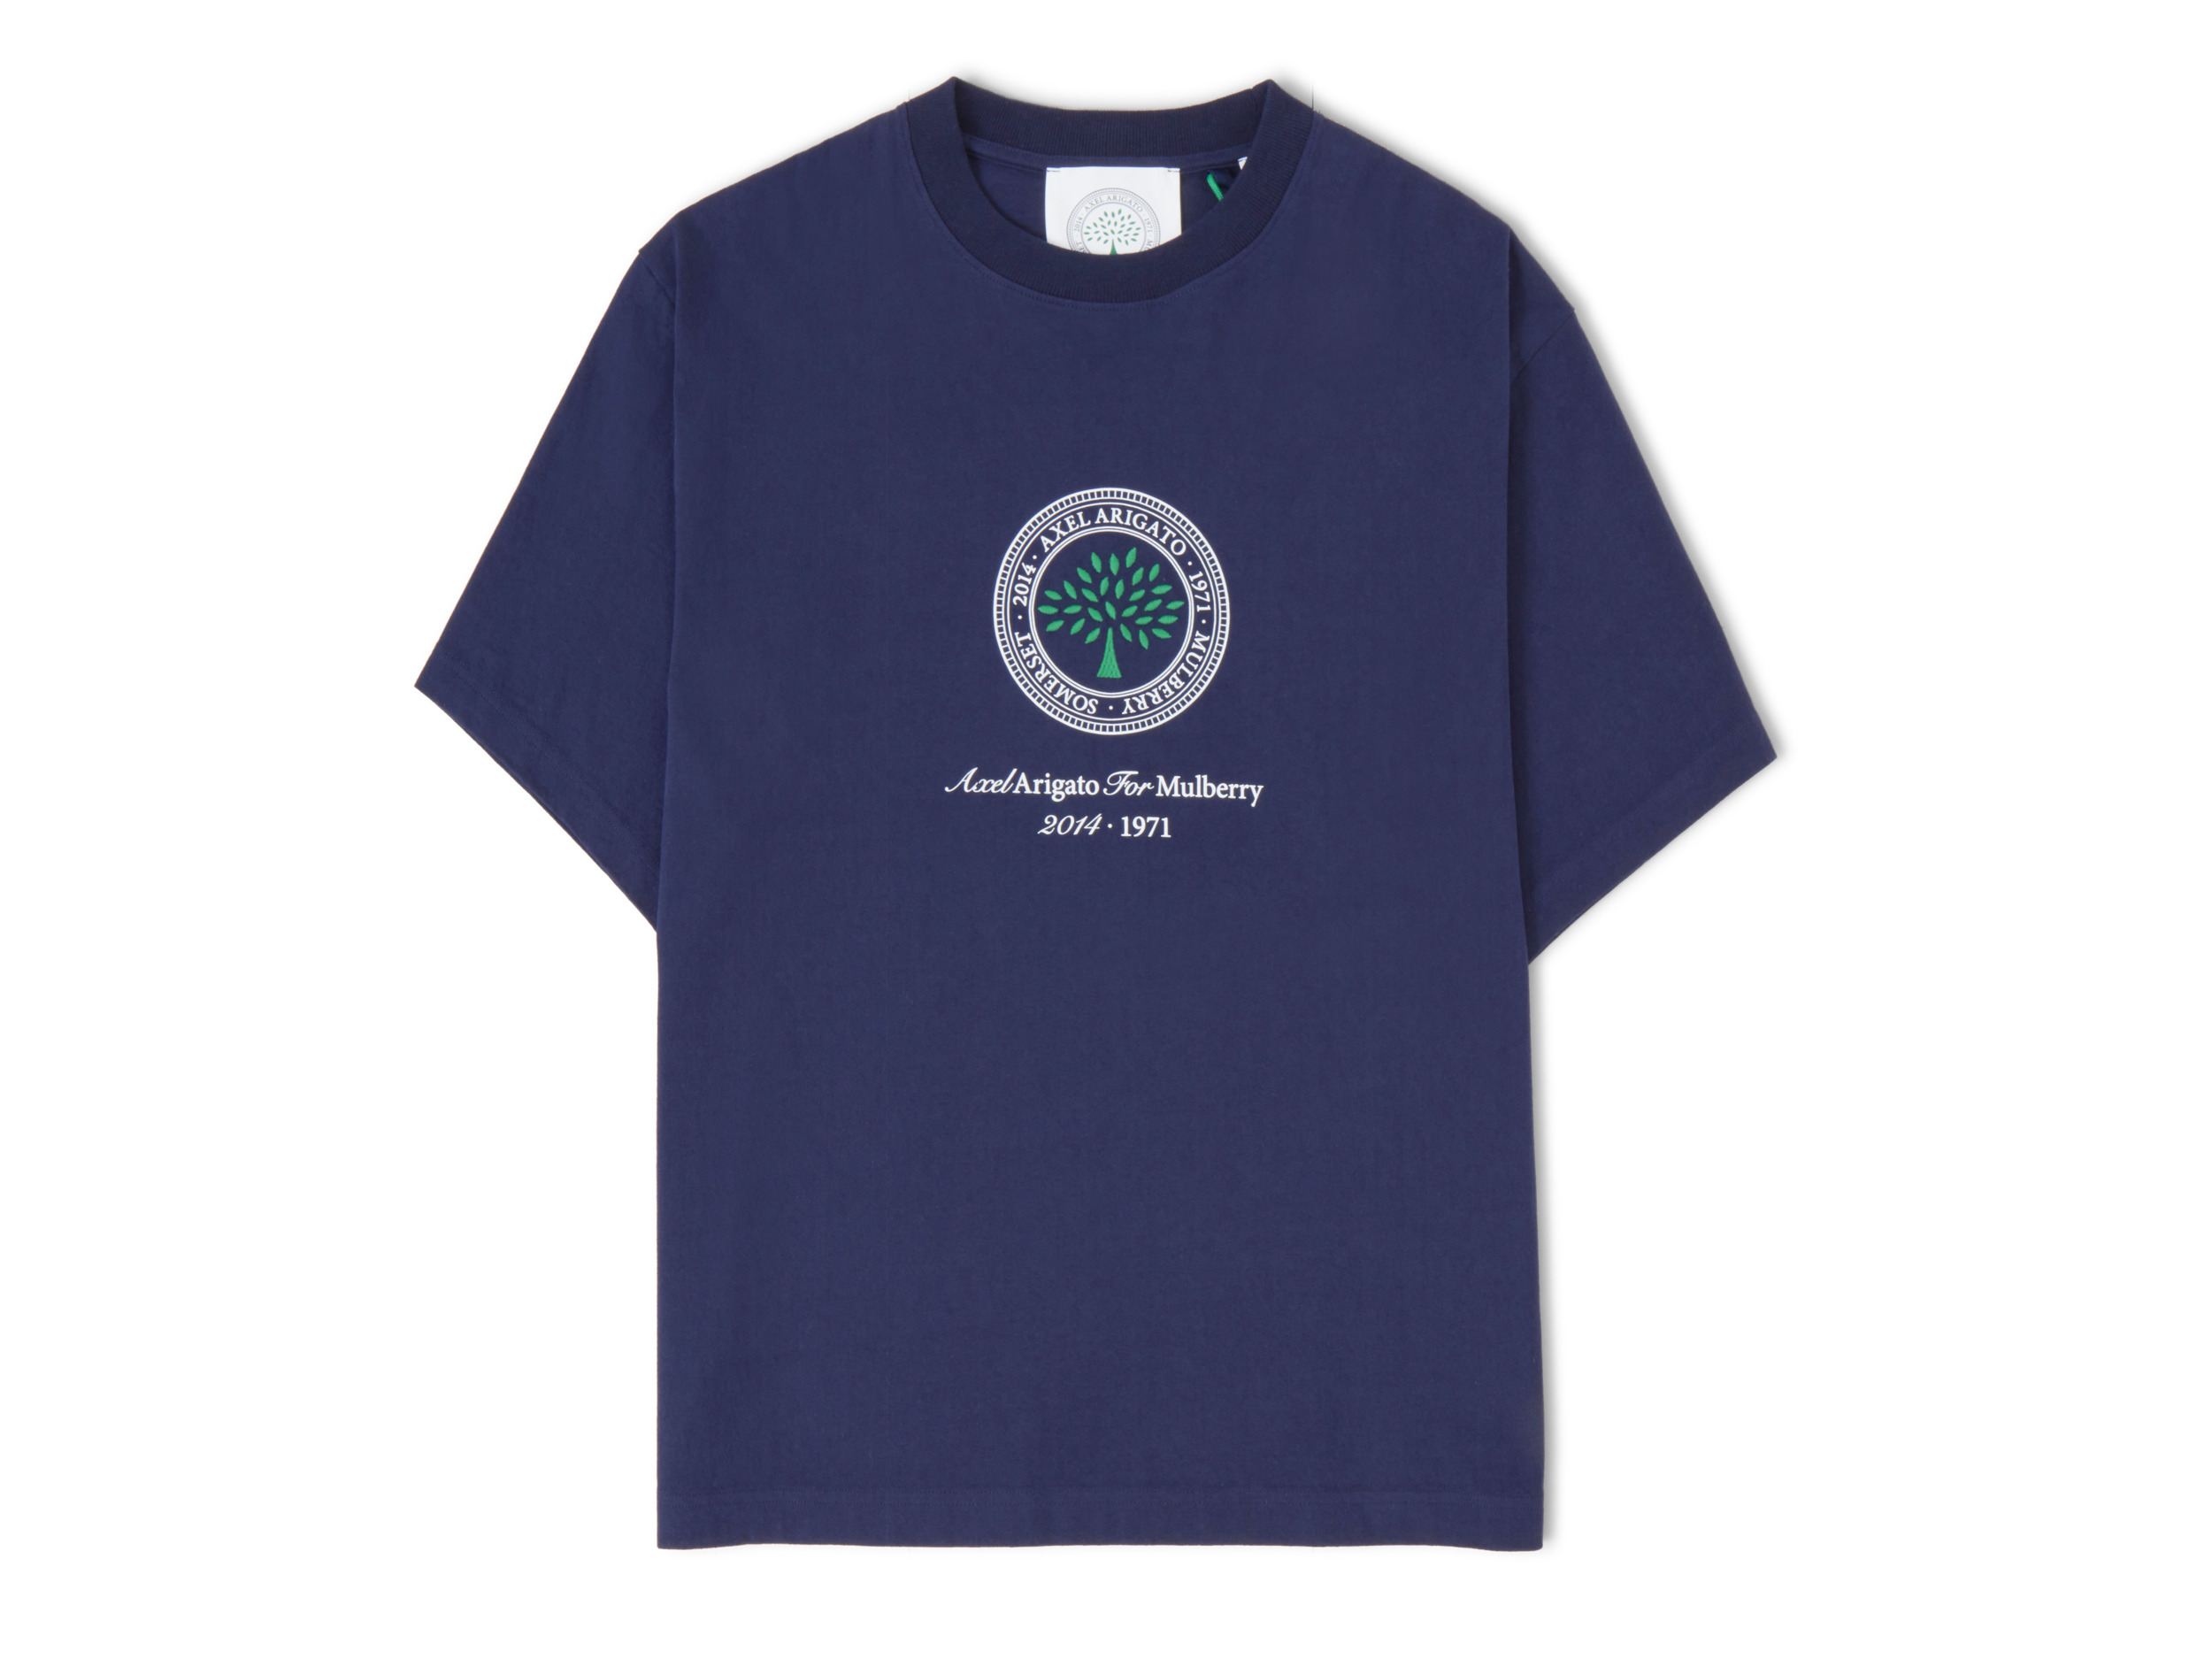 AA x Mulberry Box Fit T-shirt - 1